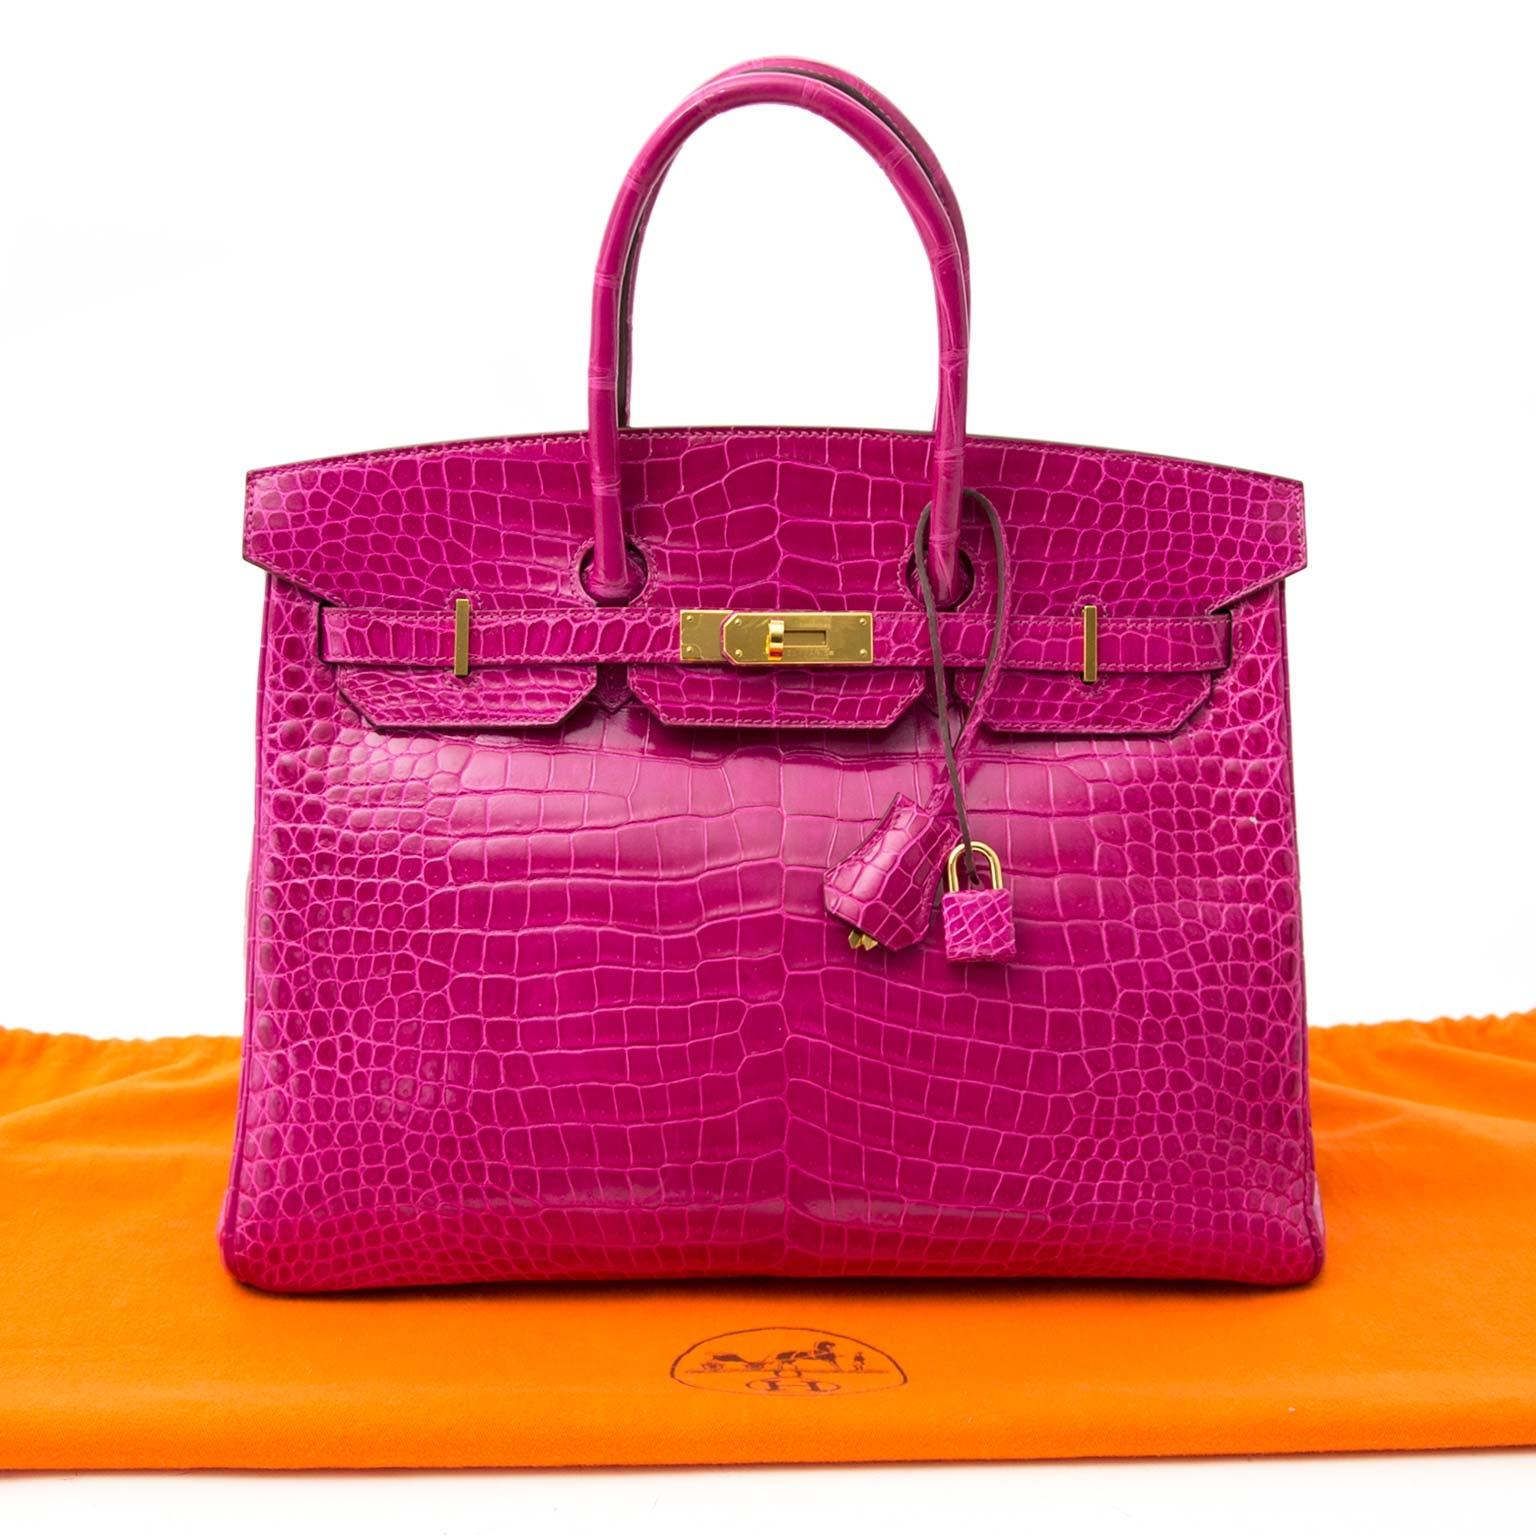 Definitely Hermès most illustrious porosus pink croc color, which is extremely hard to get!

This Hermès Birkin is incredibly rare and featured in the rose Sheherazade color, which is a stunning pink tone.

Porosus crocodile skin can be recognized